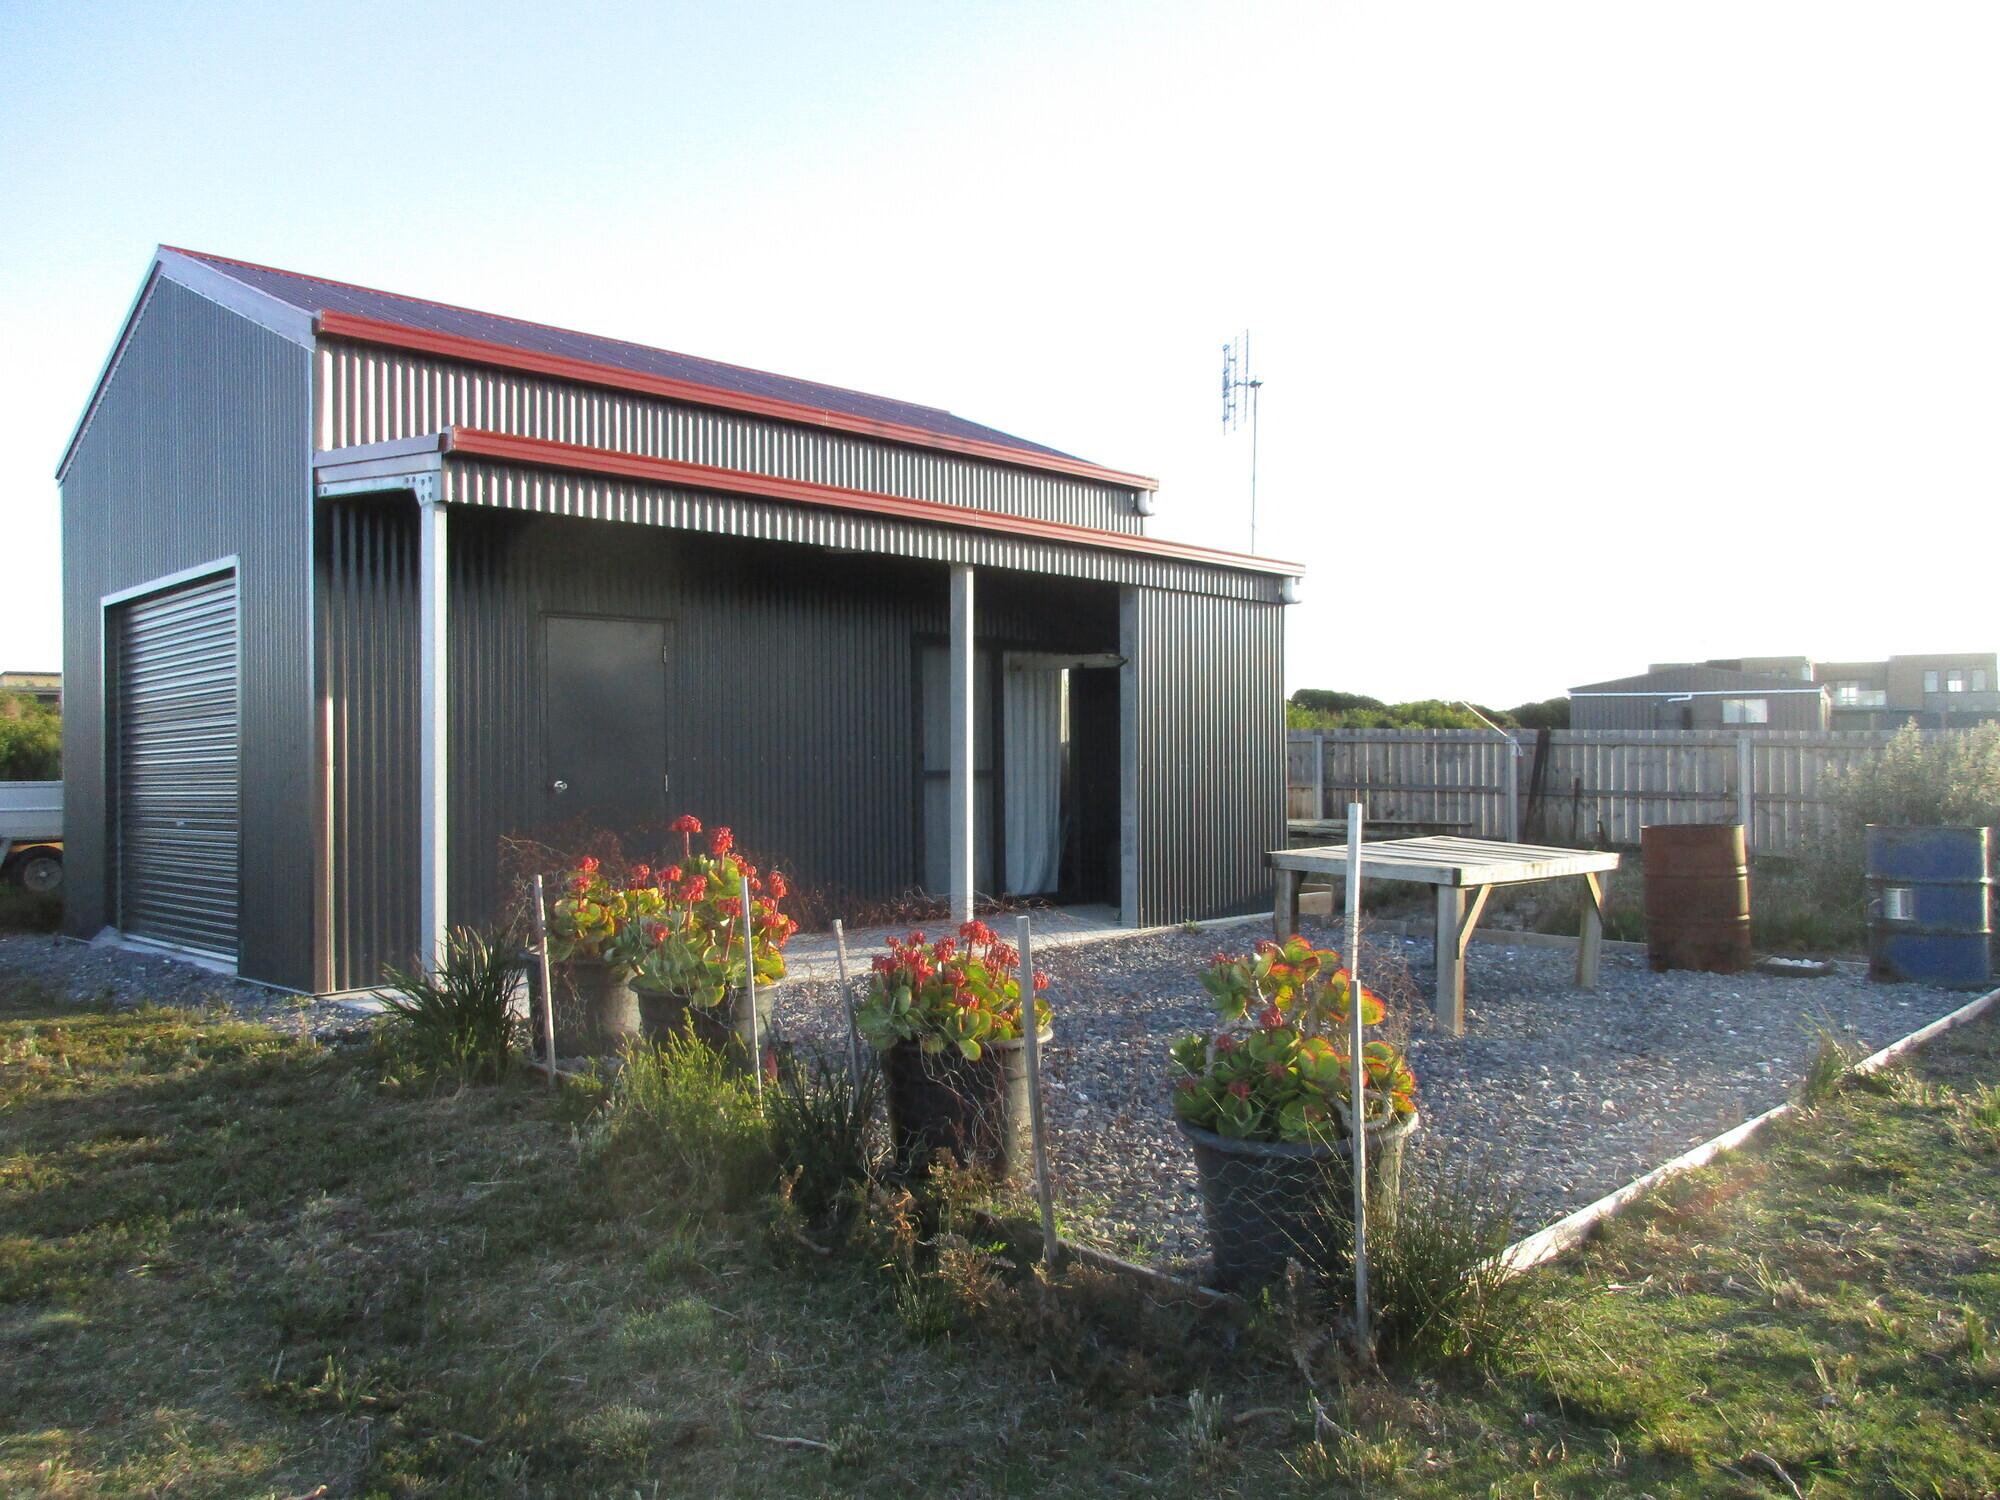 Veronica from Lulworth, TAS loves COLORBOND® steel. Roofing, Guttering & Fascia, Garage Doors, Sheds, Patio & Pergola made from COLORBOND® steel in colours Manor Red® and Monument® Matt